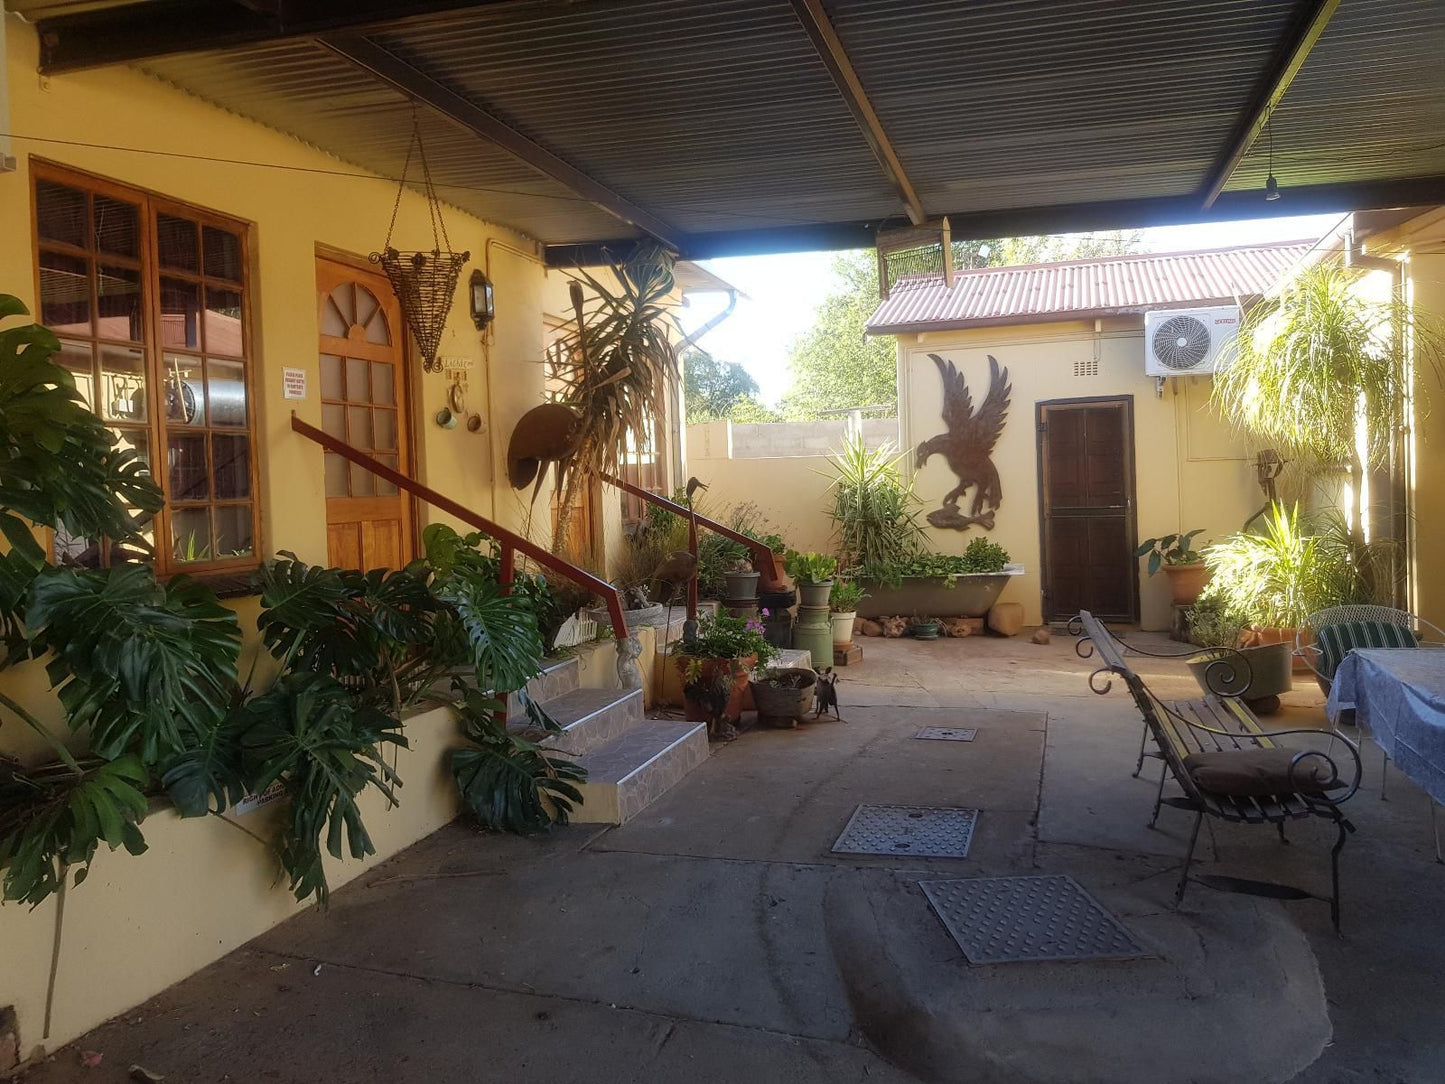 One Fountain Bandb Barkly West Northern Cape South Africa House, Building, Architecture, Palm Tree, Plant, Nature, Wood